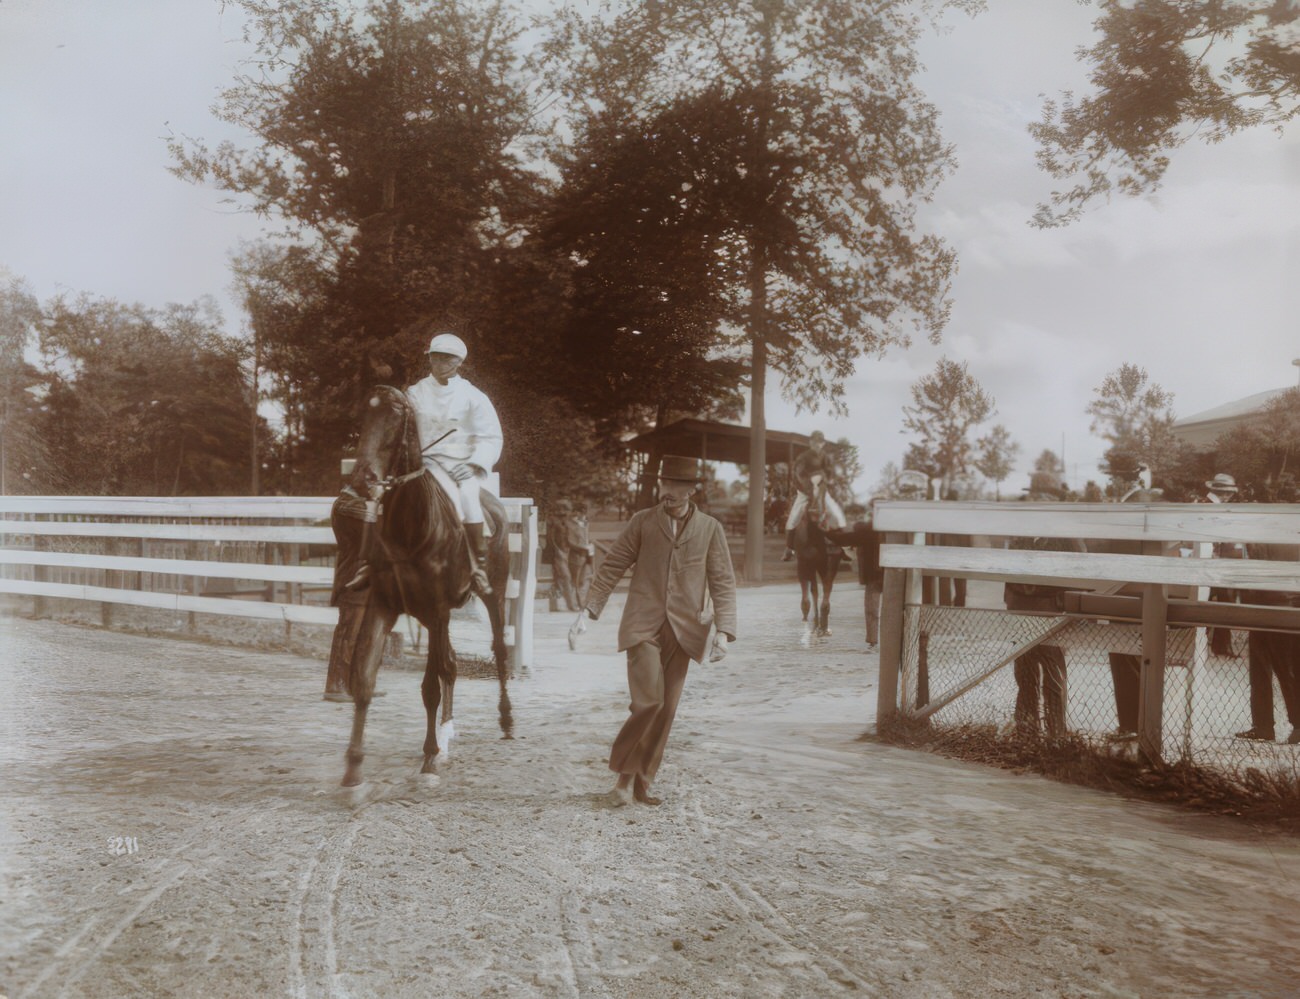 A Steeplechase Event At Morris Park Race Track, Westchester, Now Part Of The Bronx, Circa 1896.